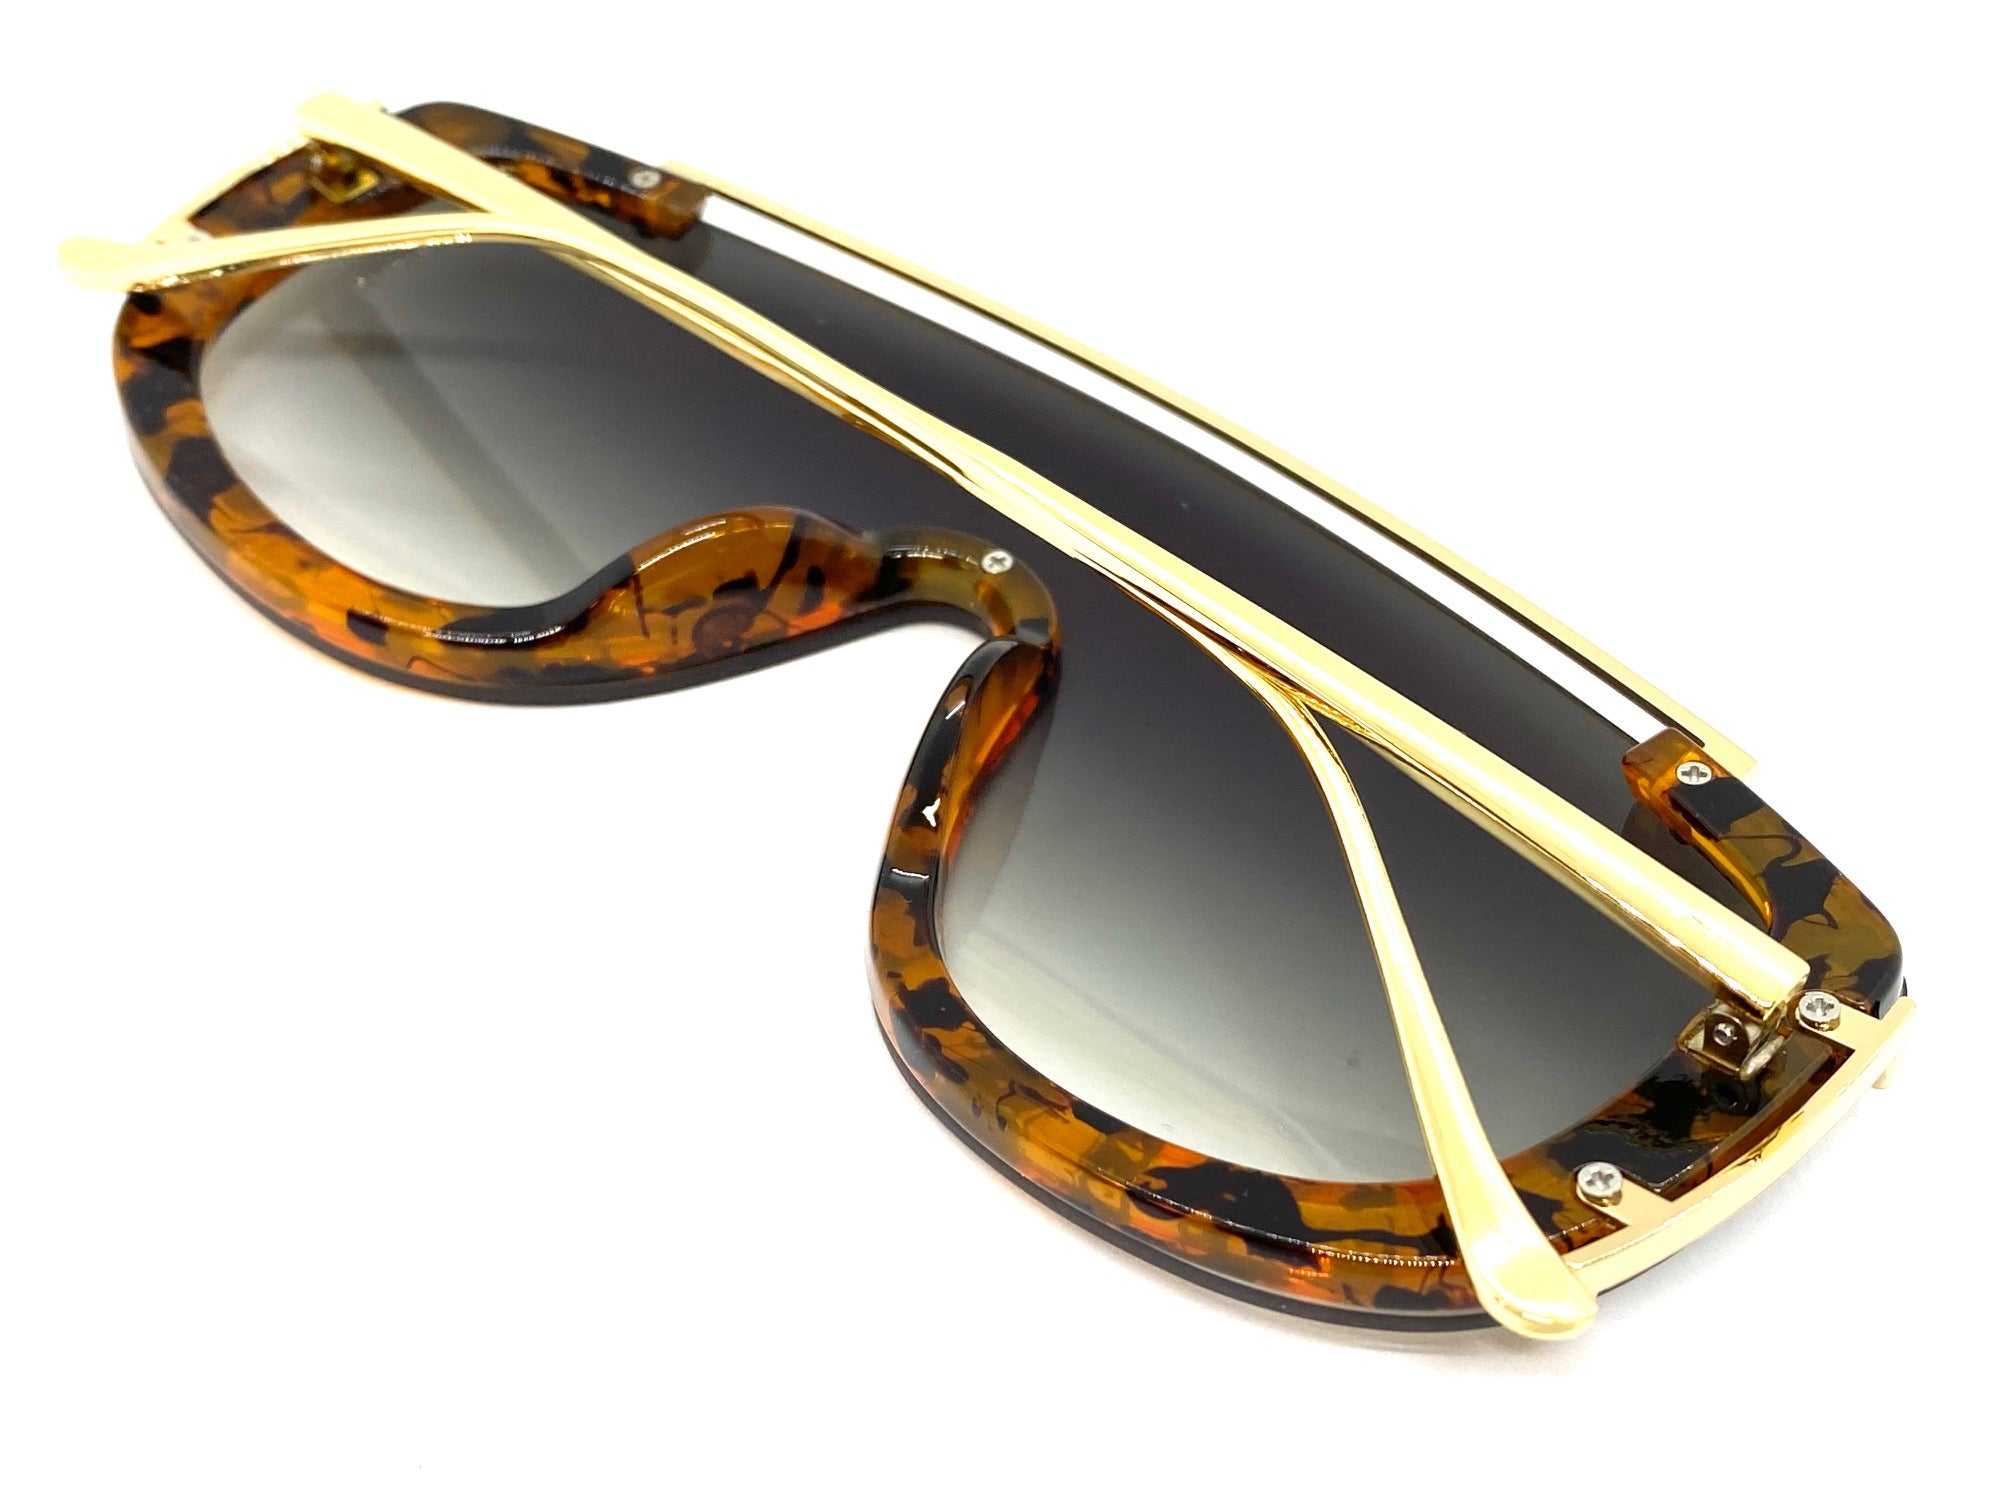 Designer Black And Gold Sunglasses For Men And Women Classic Square Full  Frame Vintage 1165 1.1 Shiny Gold Metal UV Protection Perfect For Outdoor  Activities From Luxurysunglasses, $46.31